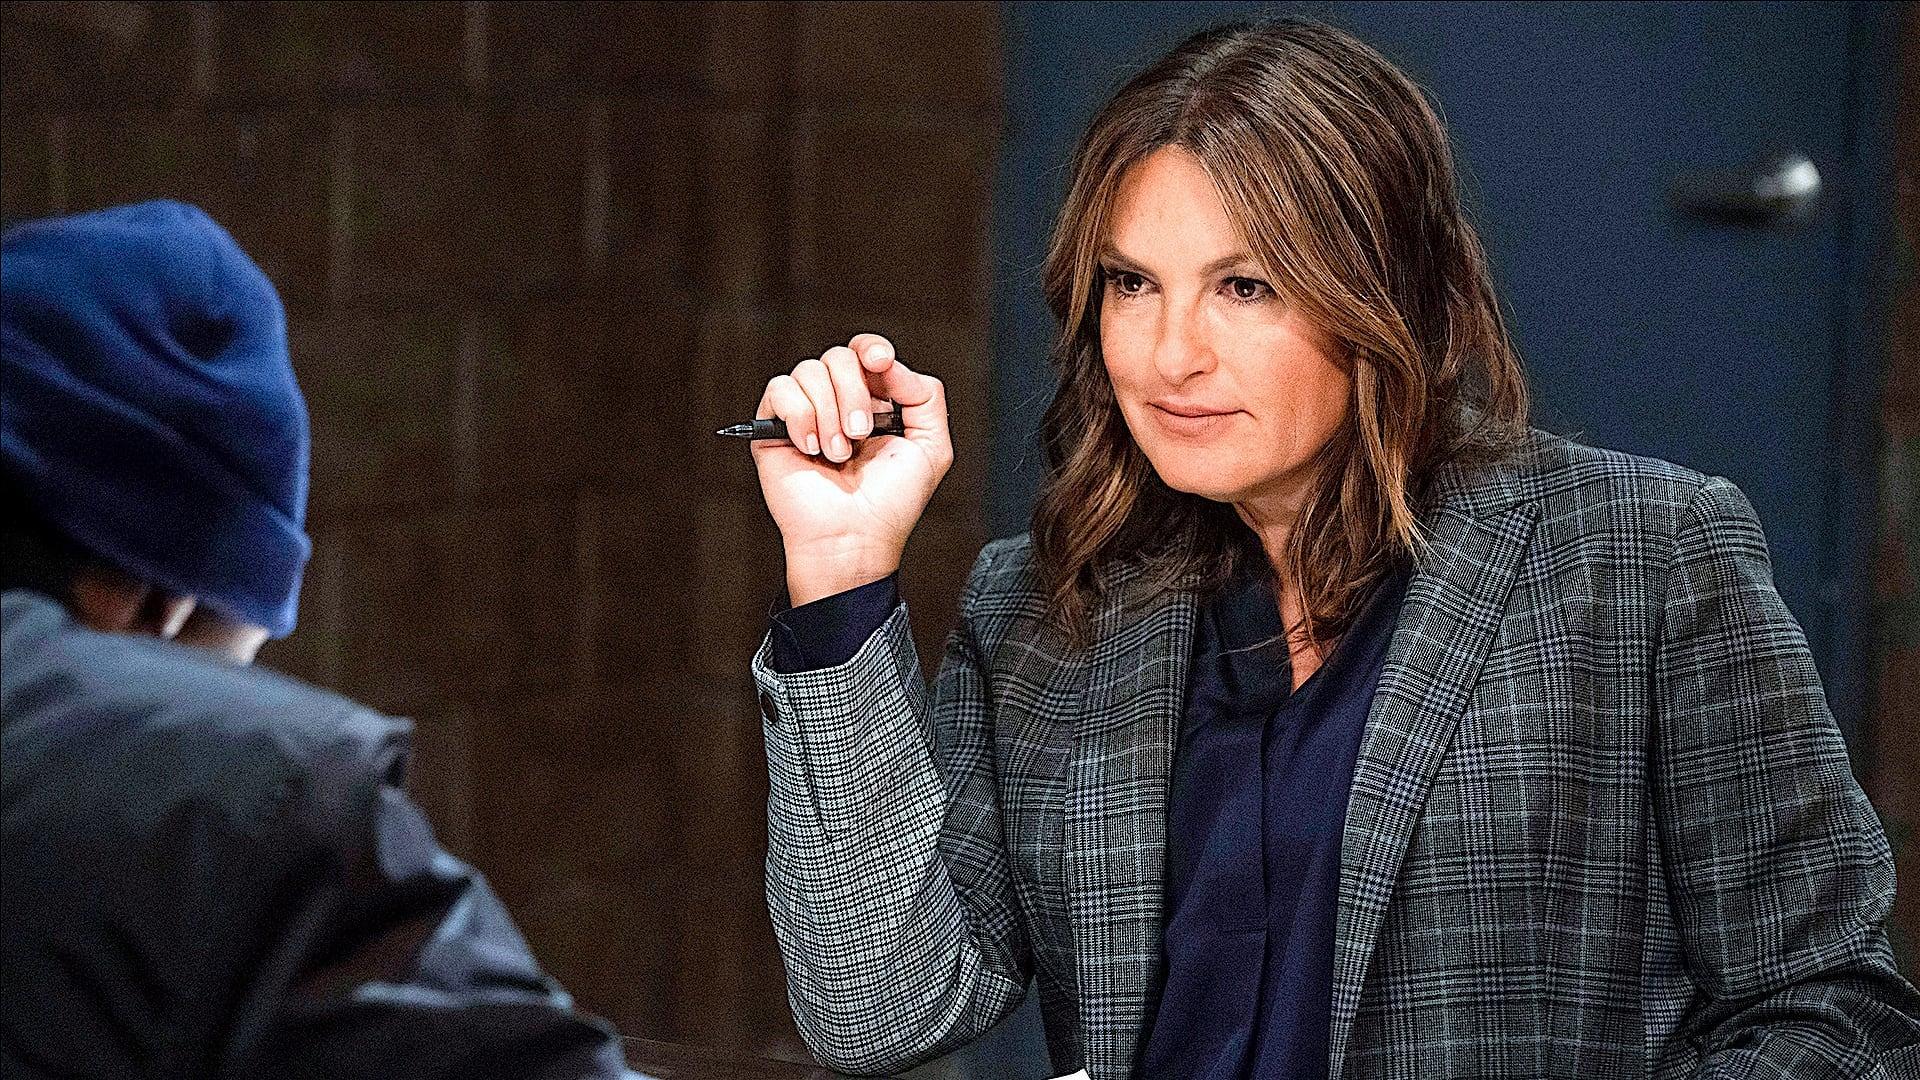 law and order svu season 6 episode 17